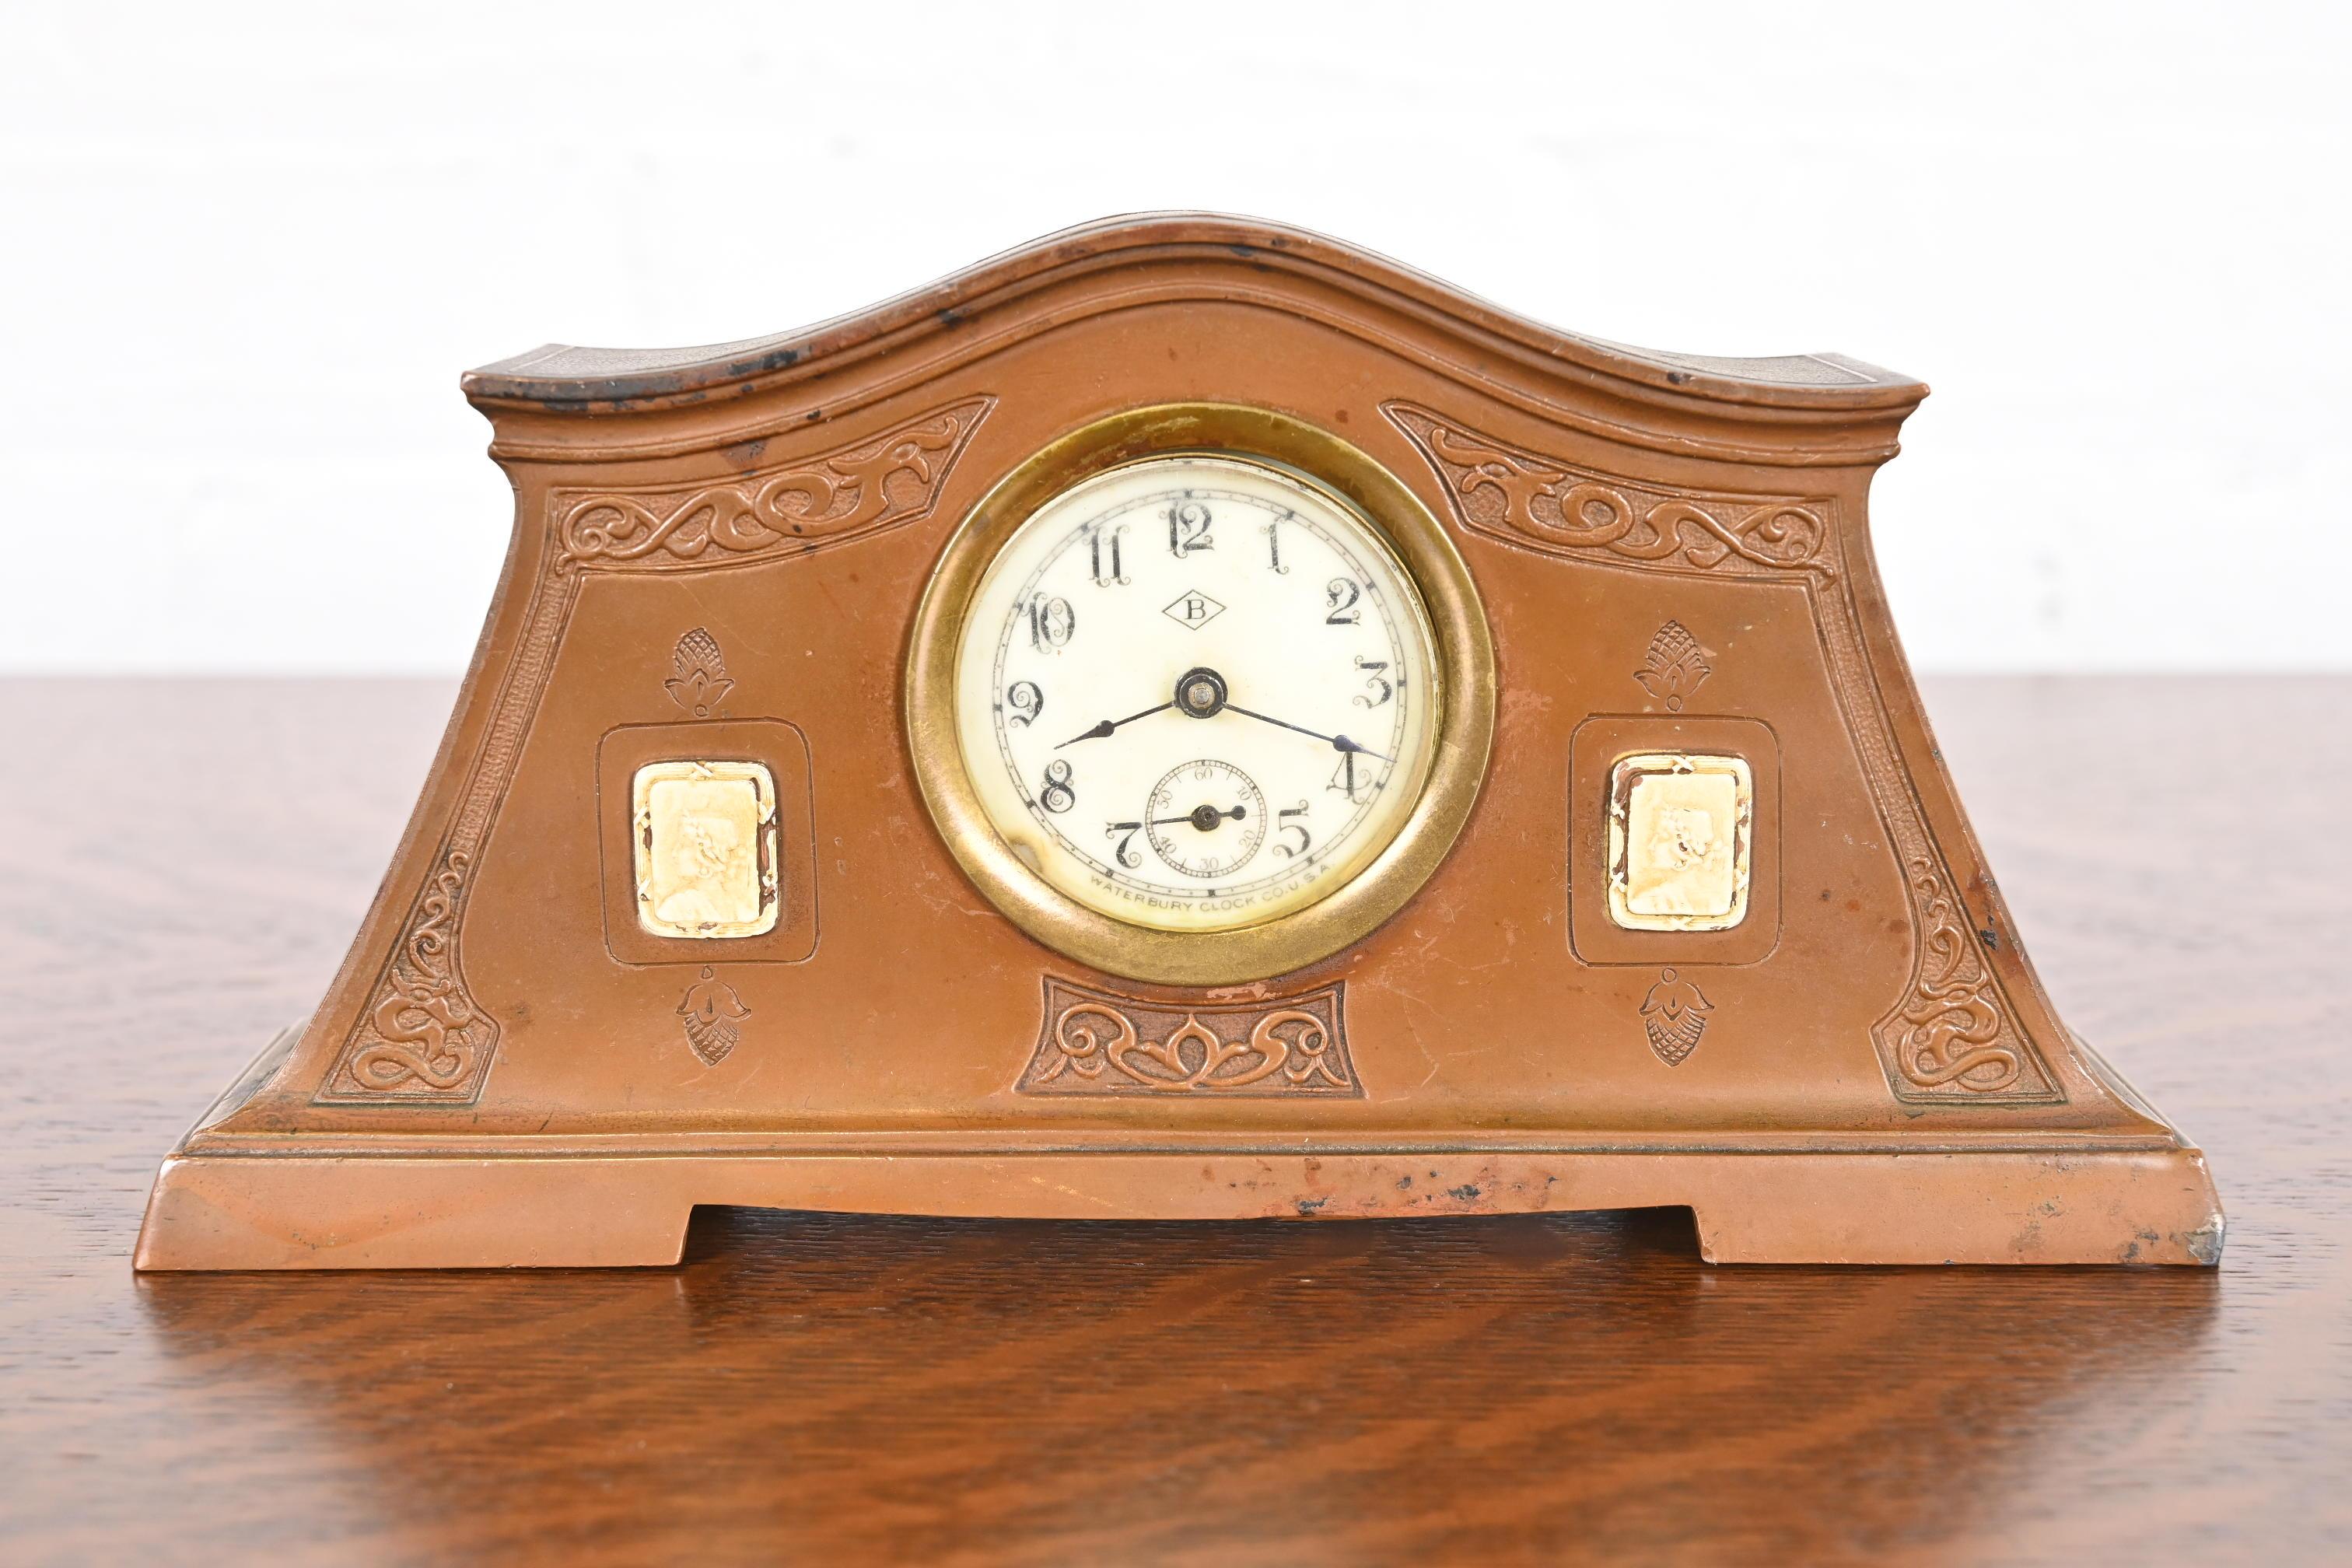 A gorgeous Arts & Crafts period bronze mantel clock with an emblems of classical Greek figures

By Benedict Studios (signed to the underside)

USA, Circa 1910

Measures: 8.25